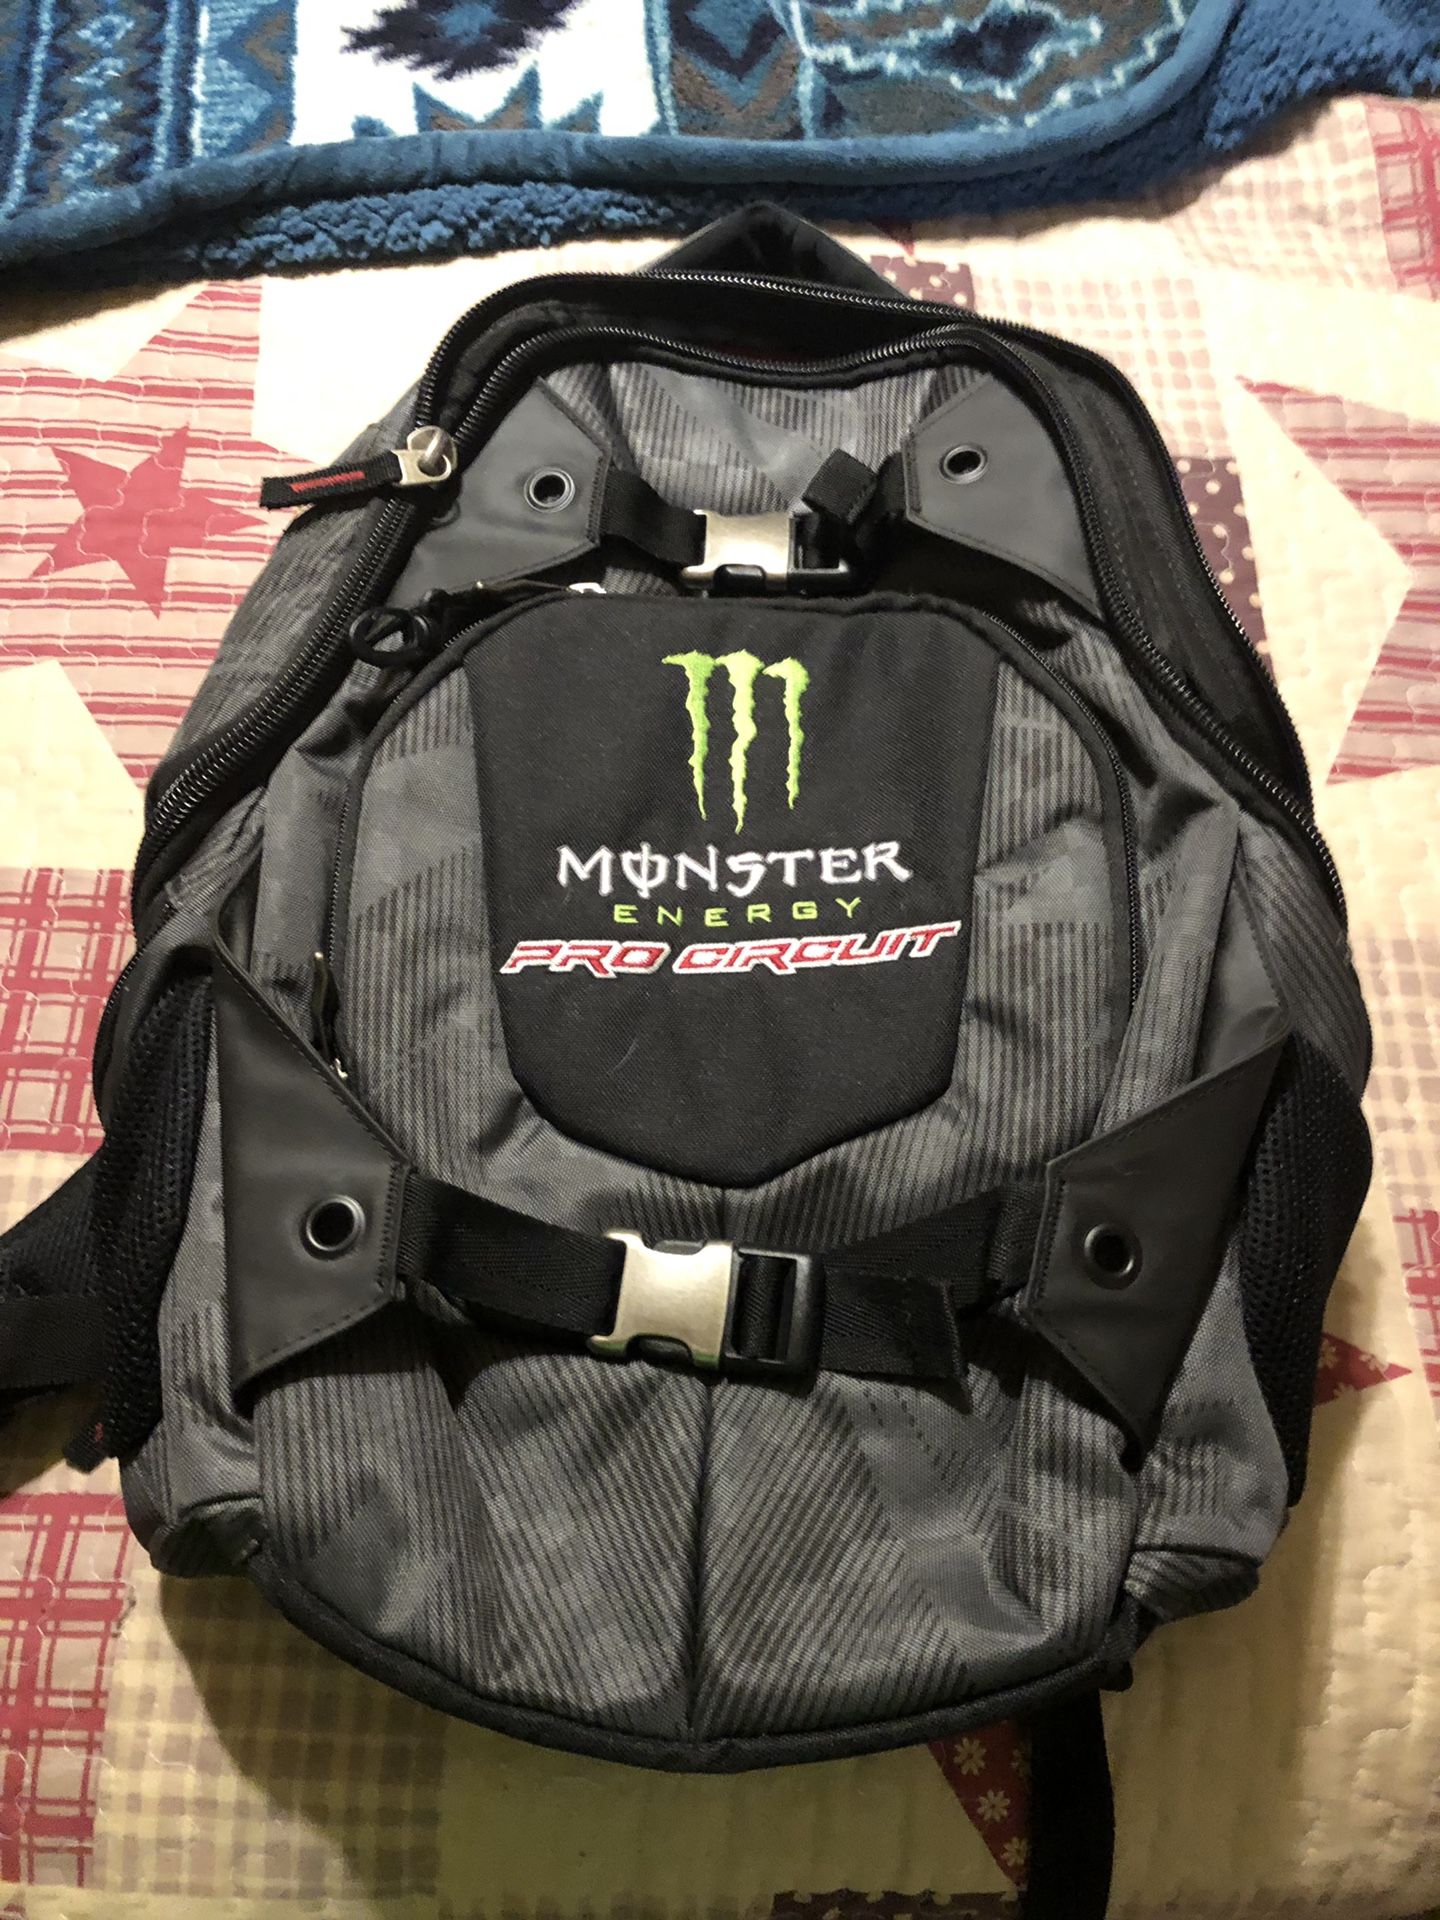 Brand new monster backpack 25 cash paid 110 really nice for a motorcycle just got padding on the back in case you were to fall